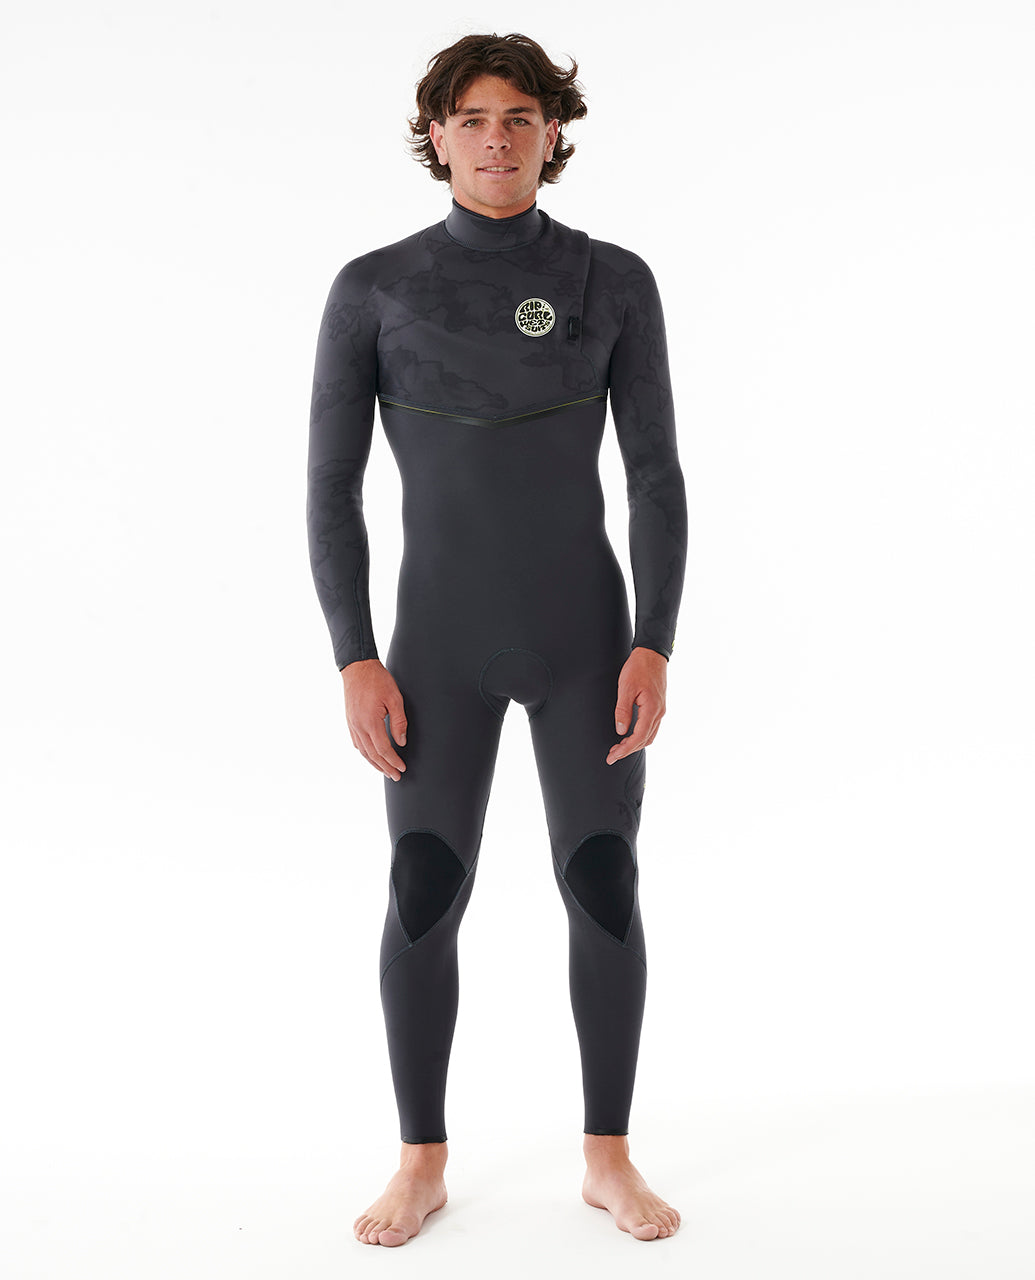 E-Bomb 3/2 Zip Free Steamer Wetsuit - Charcoal